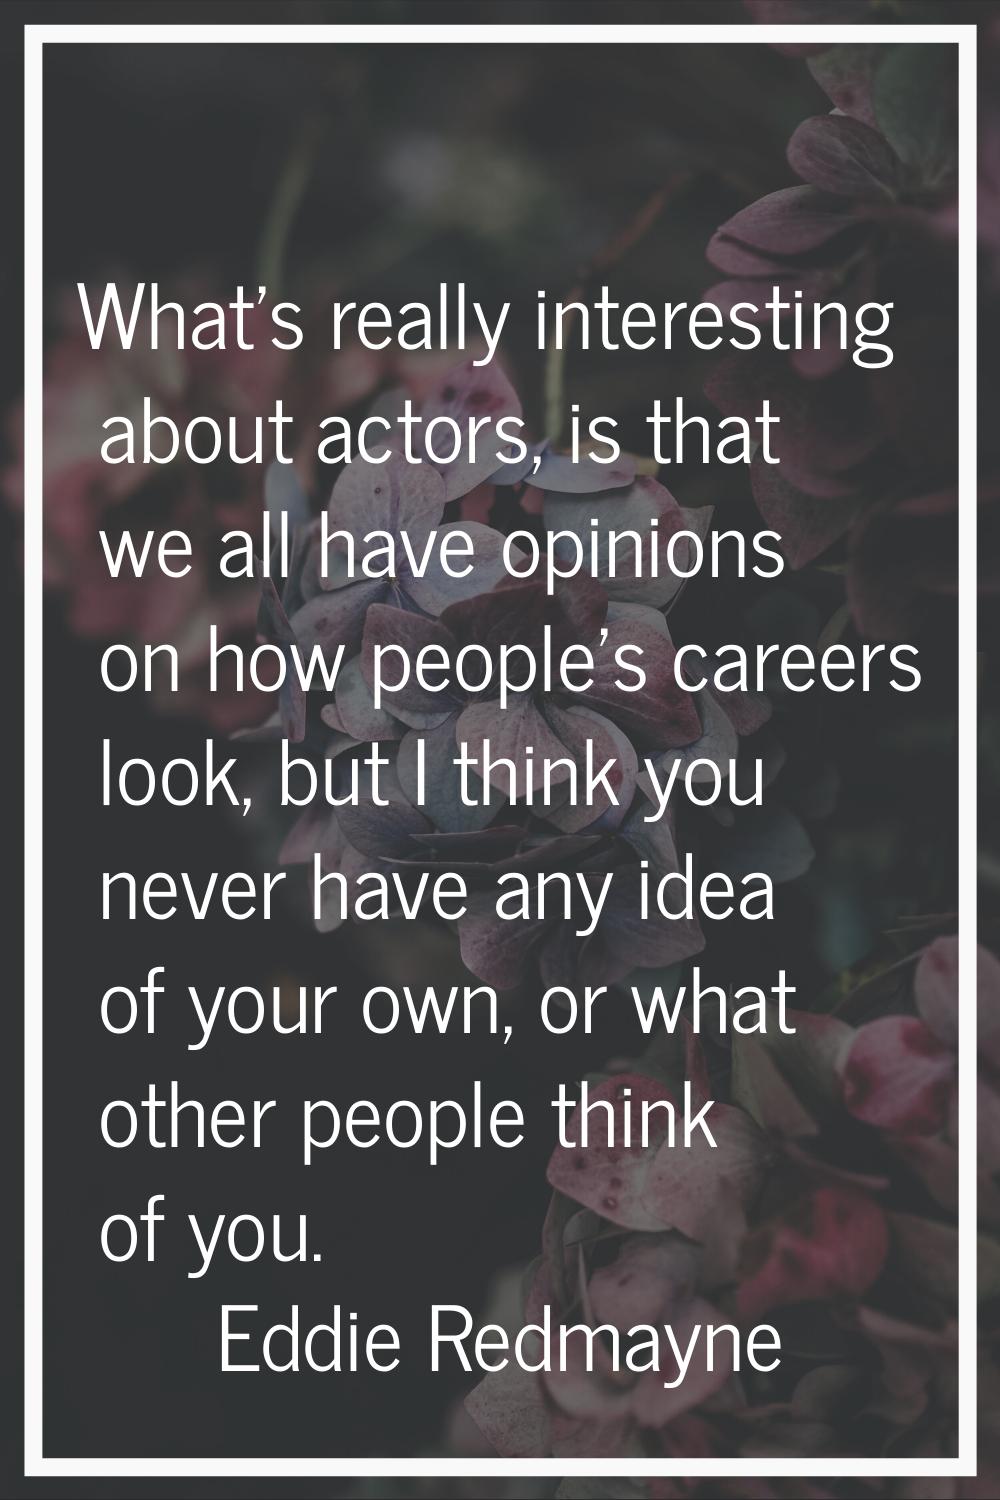 What's really interesting about actors, is that we all have opinions on how people's careers look, 